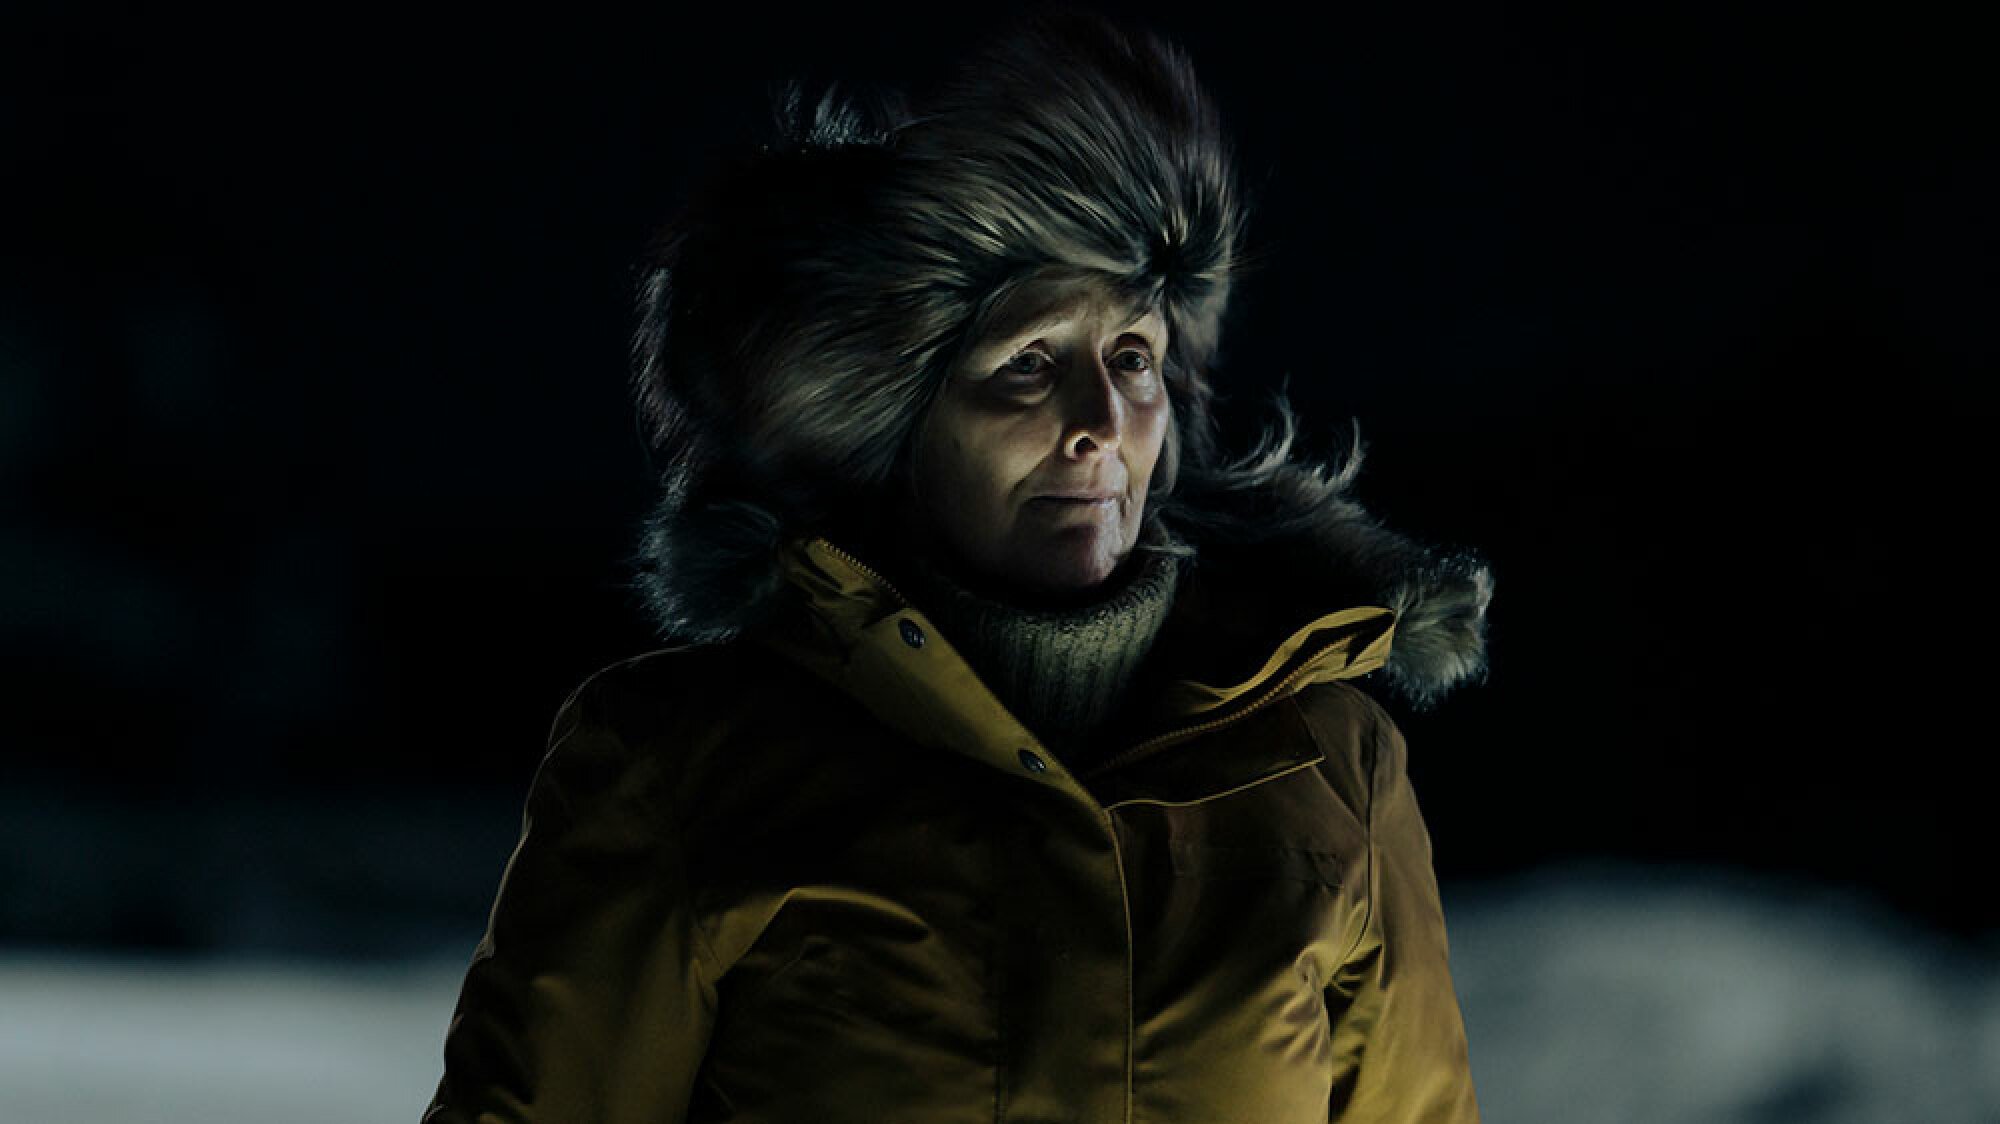 A woman stands in a coat outside in the snowy darkness.